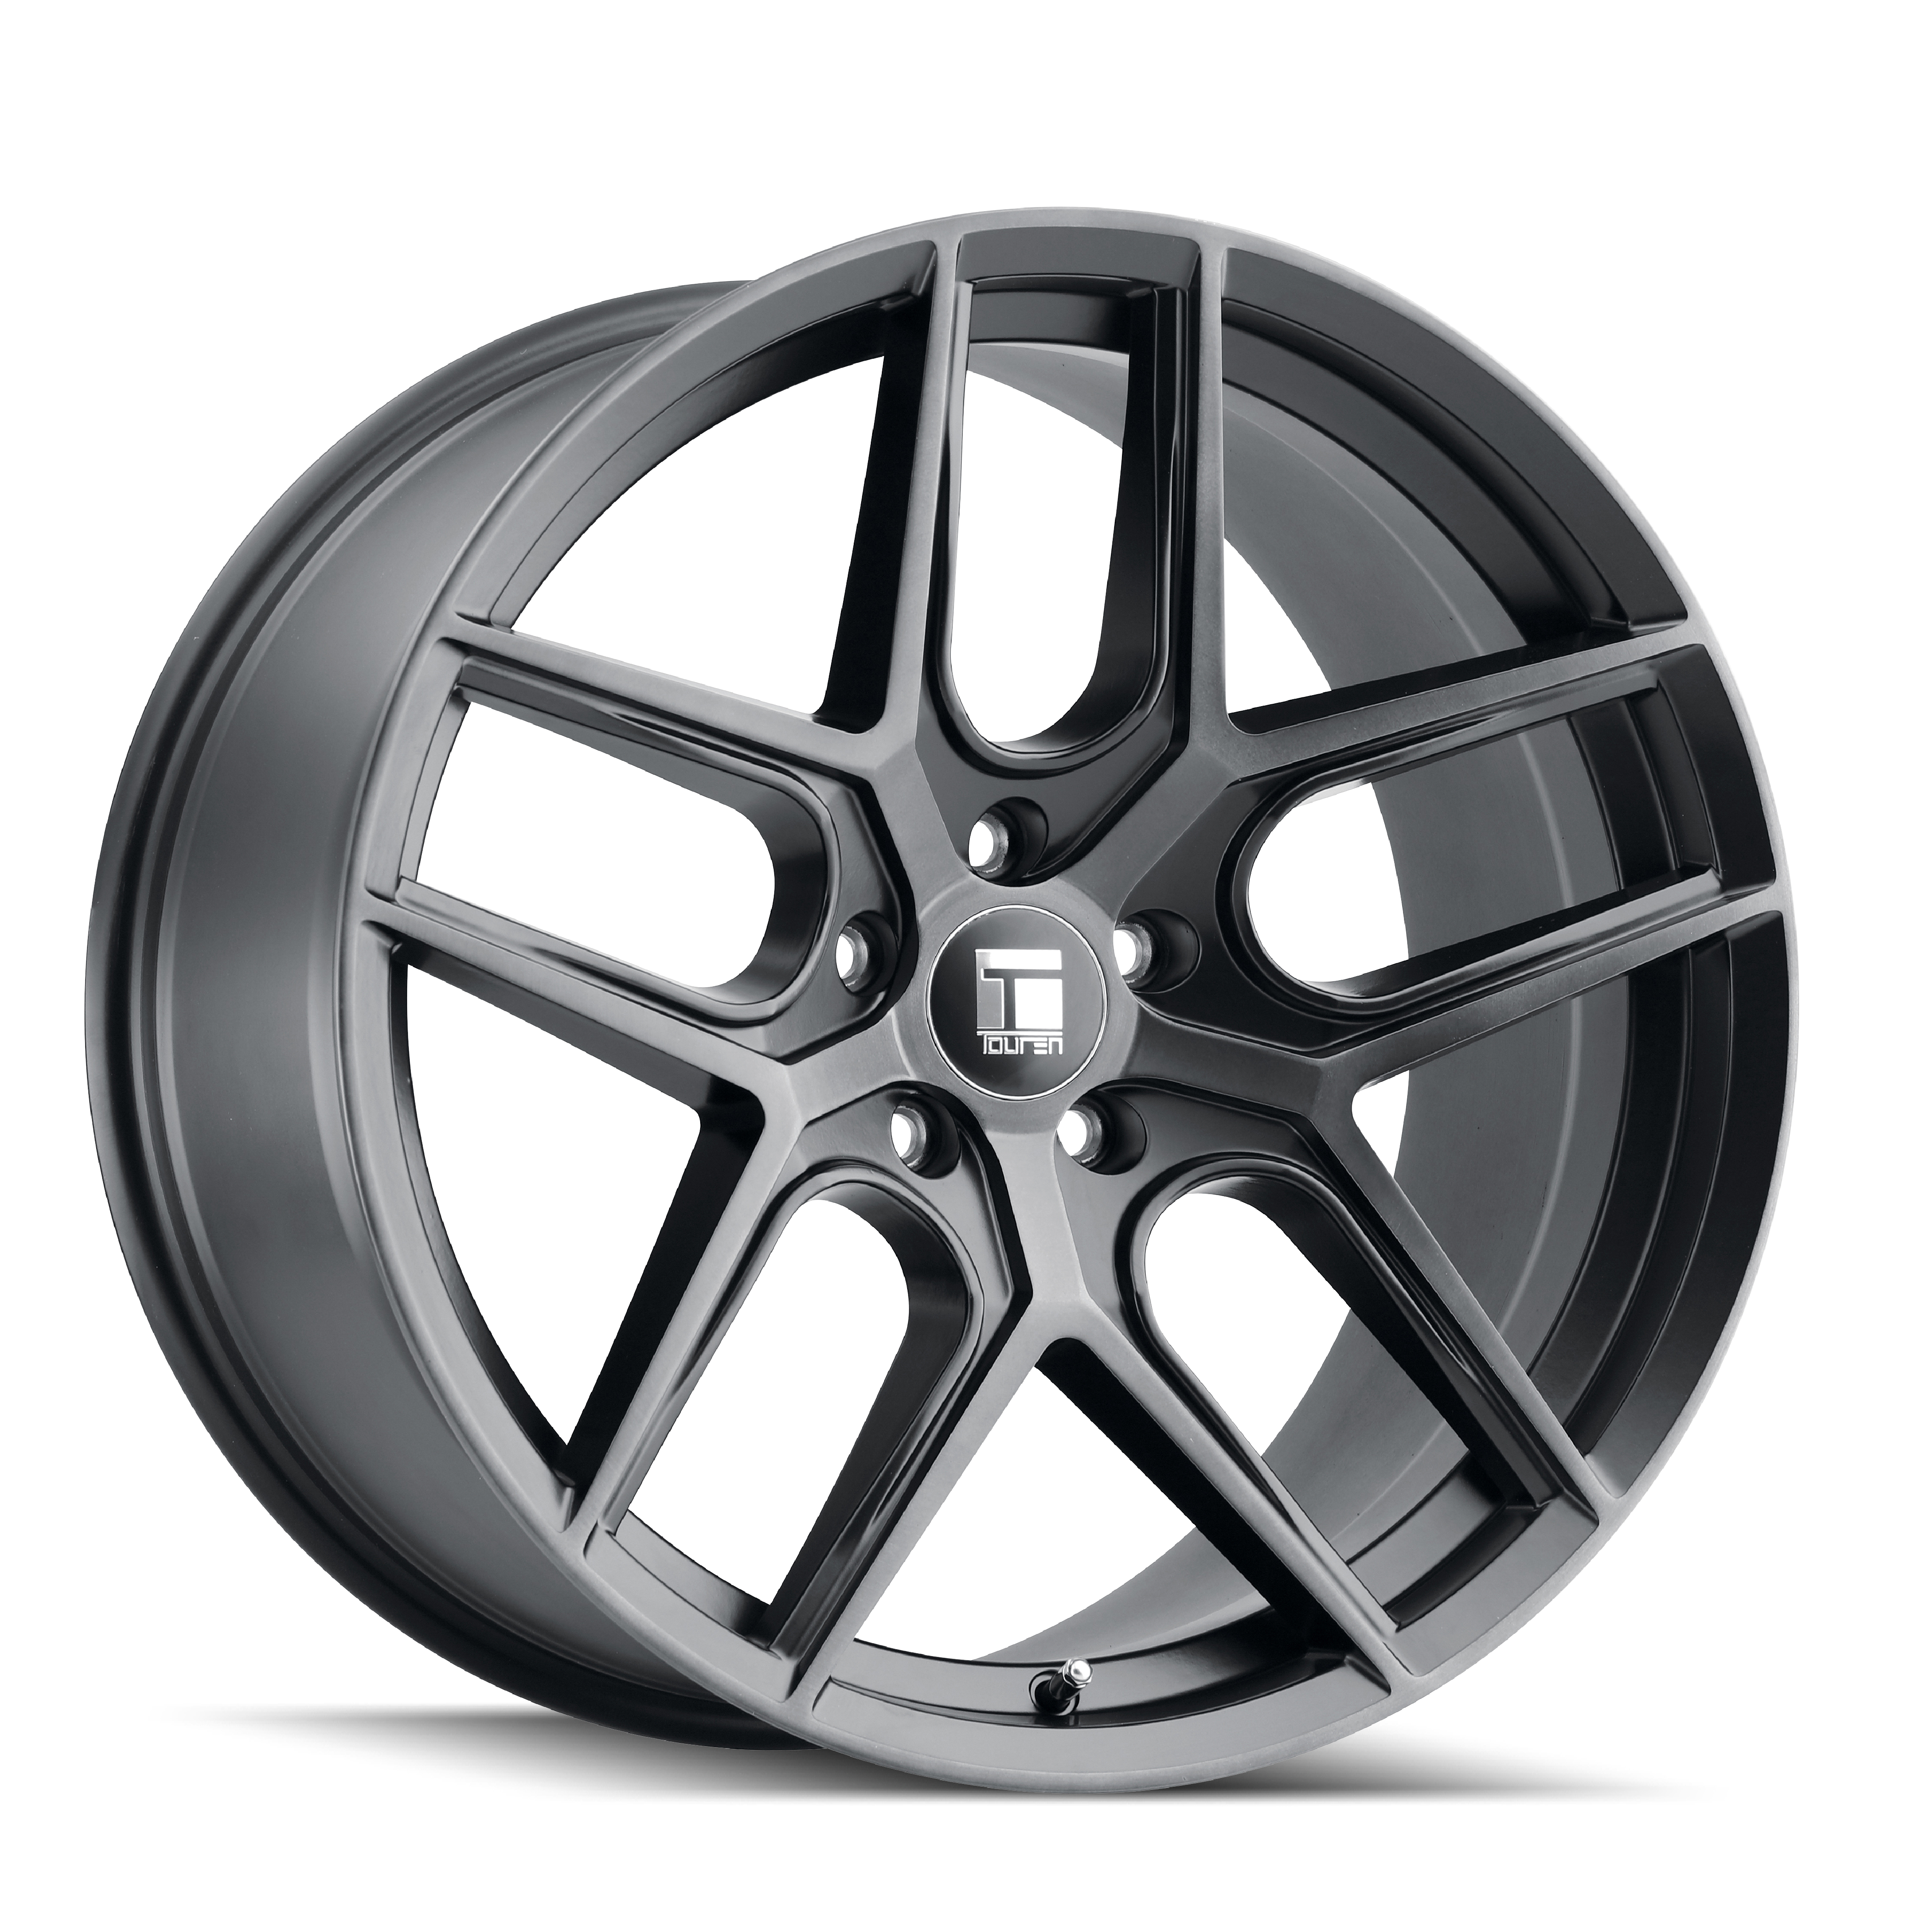 Touren | Product Category | The Wheel Group | Page 2